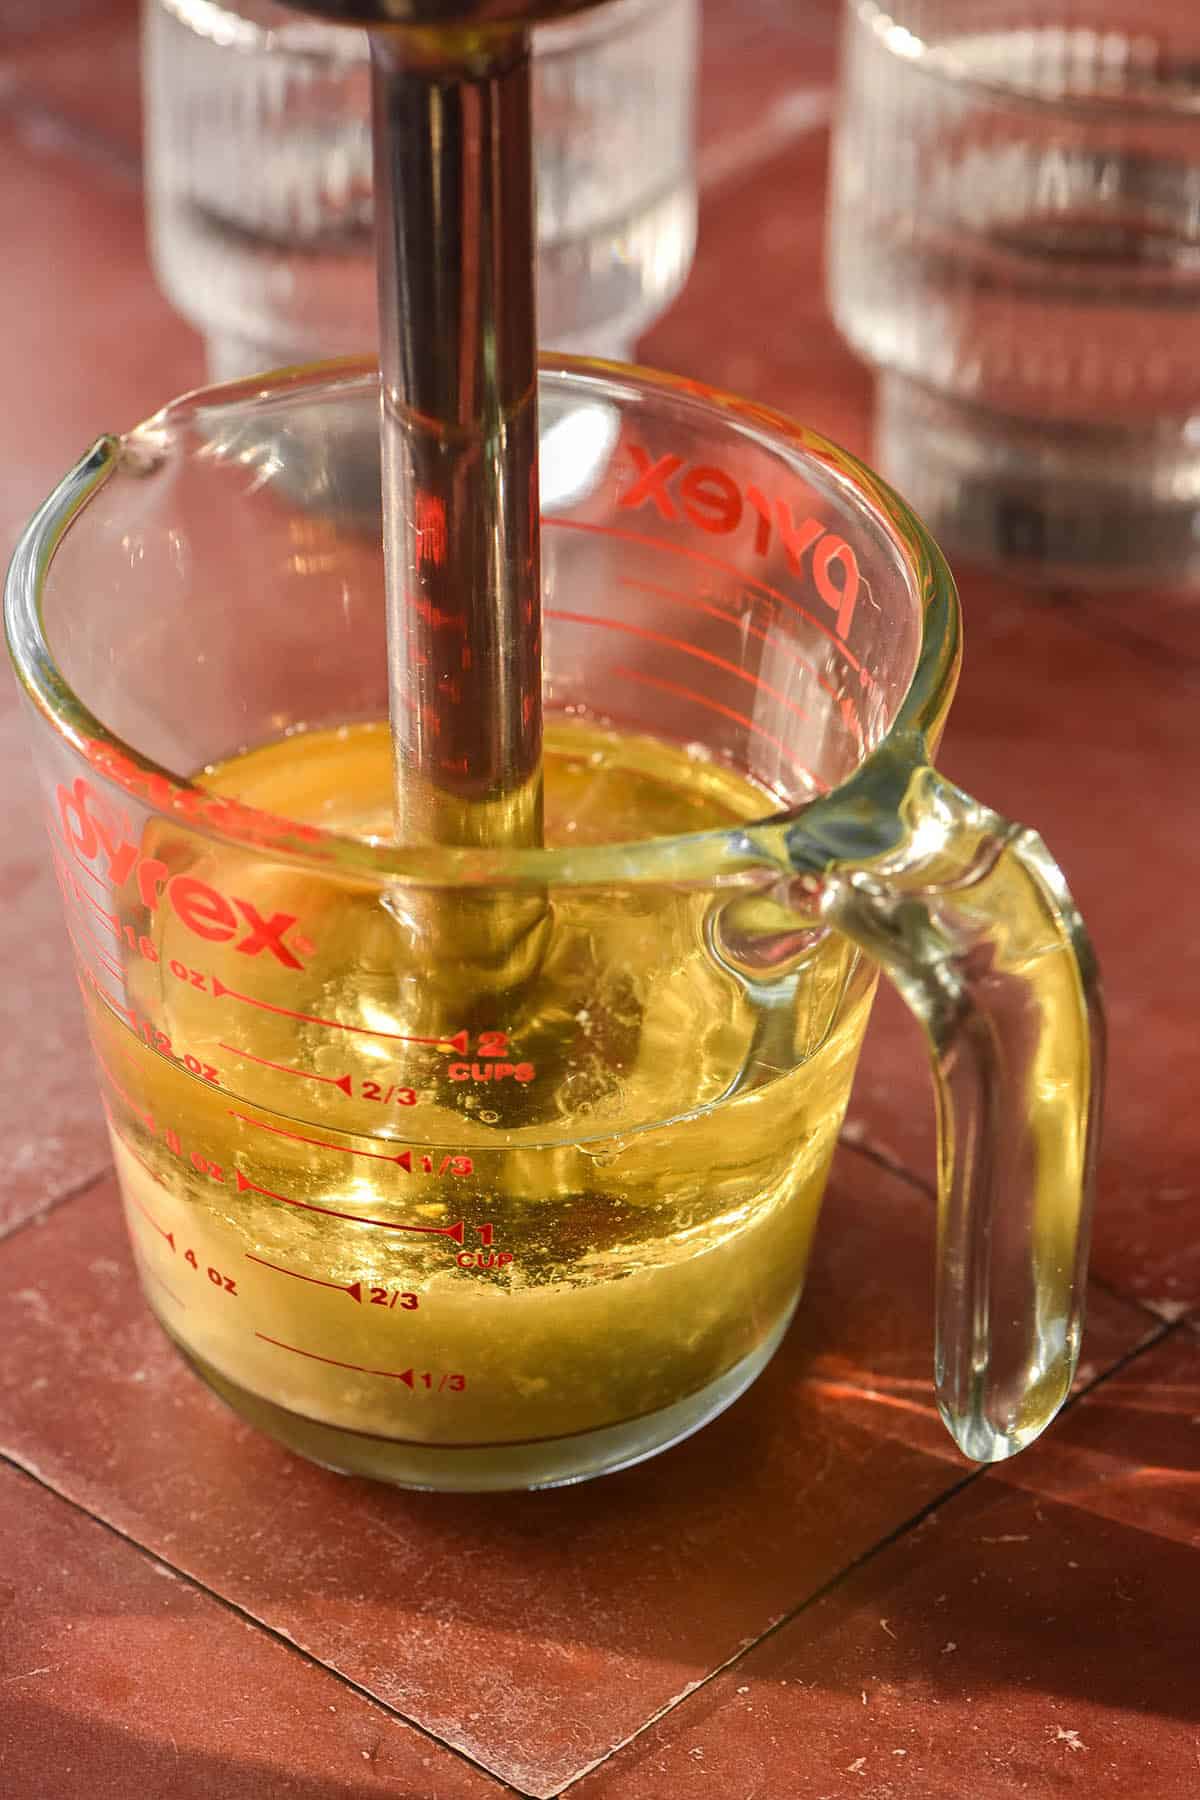 An image of a pouring jug filled with the ingredients for low FODMAP mayonnaise. The jug sits on a terracotta stone backdrop with an immersion blender sitting in the jug. Two glasses of water sit to the back right of the image.